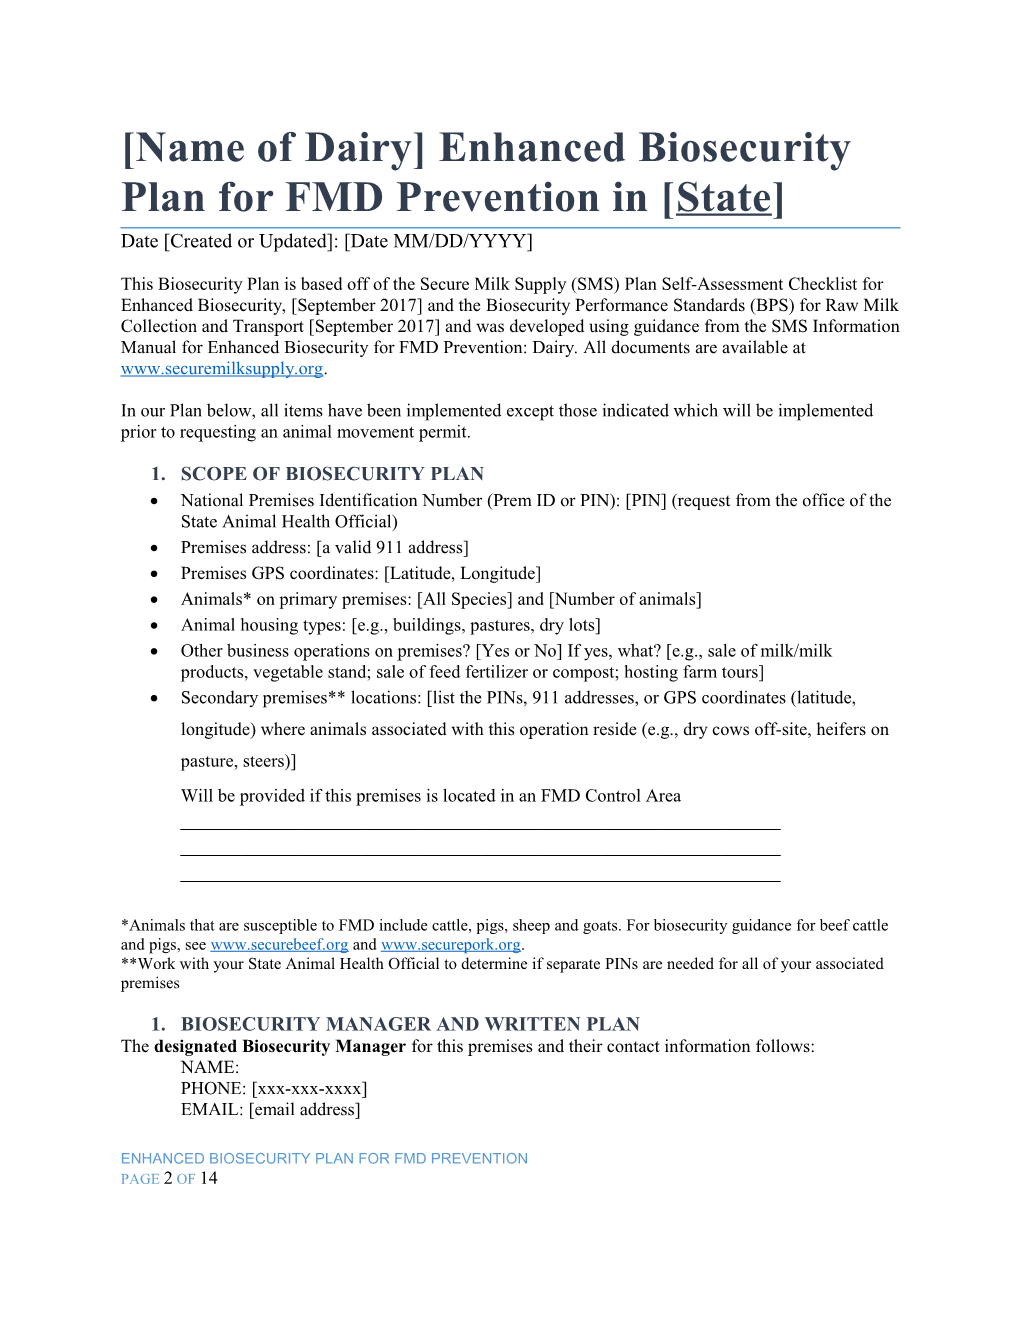 Instruction Page for ENHANCED BIOSECURITY PLAN for FMD PREVENTION TEMPLATE